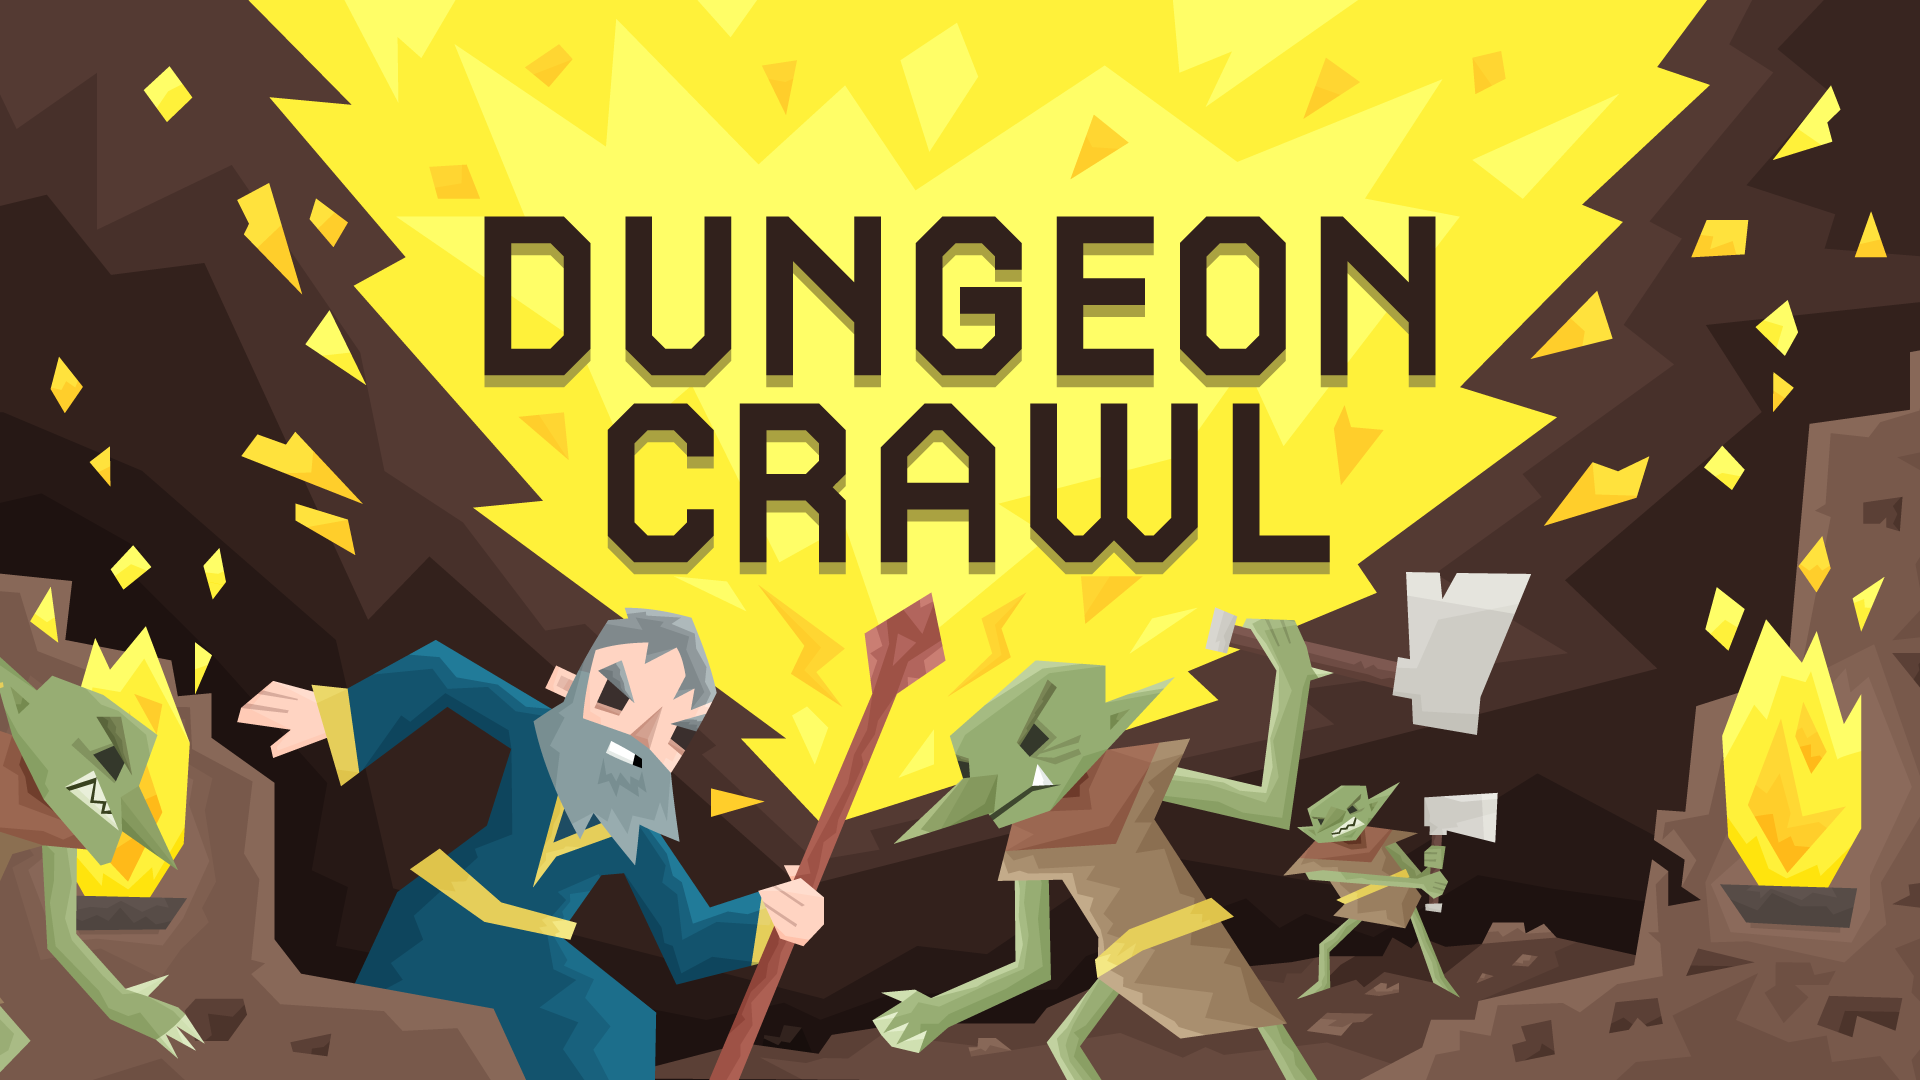 playing dungeon crawl stone soup on amazon fire